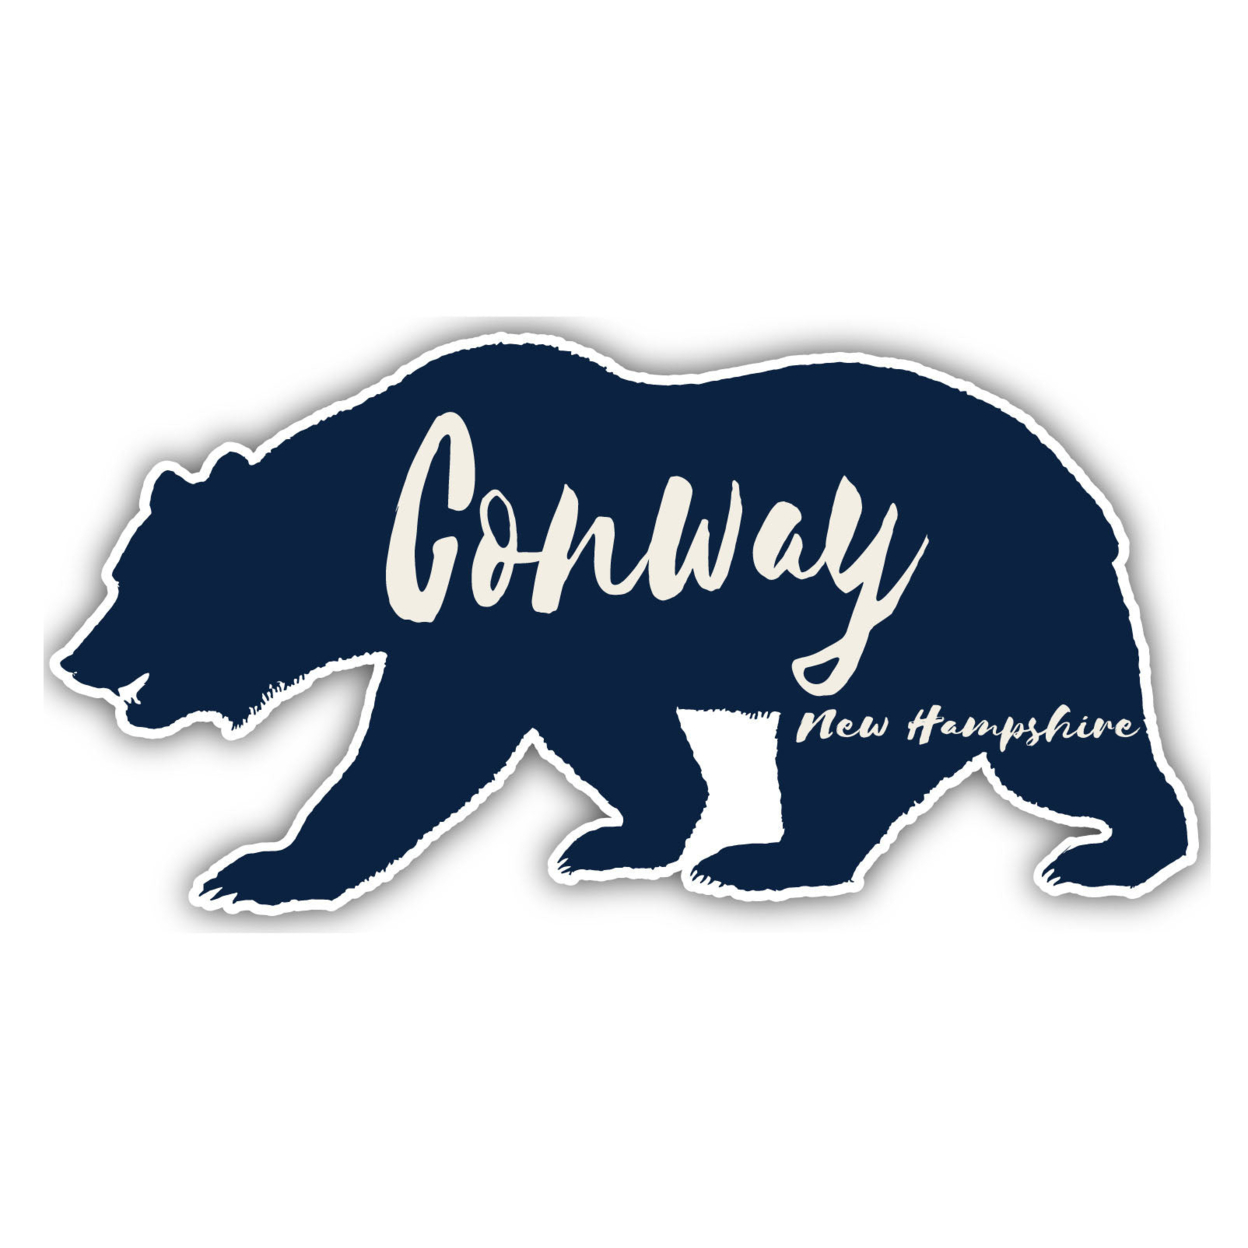 Conway New Hampshire Souvenir Decorative Stickers (Choose Theme And Size) - Single Unit, 10-Inch, Great Outdoors